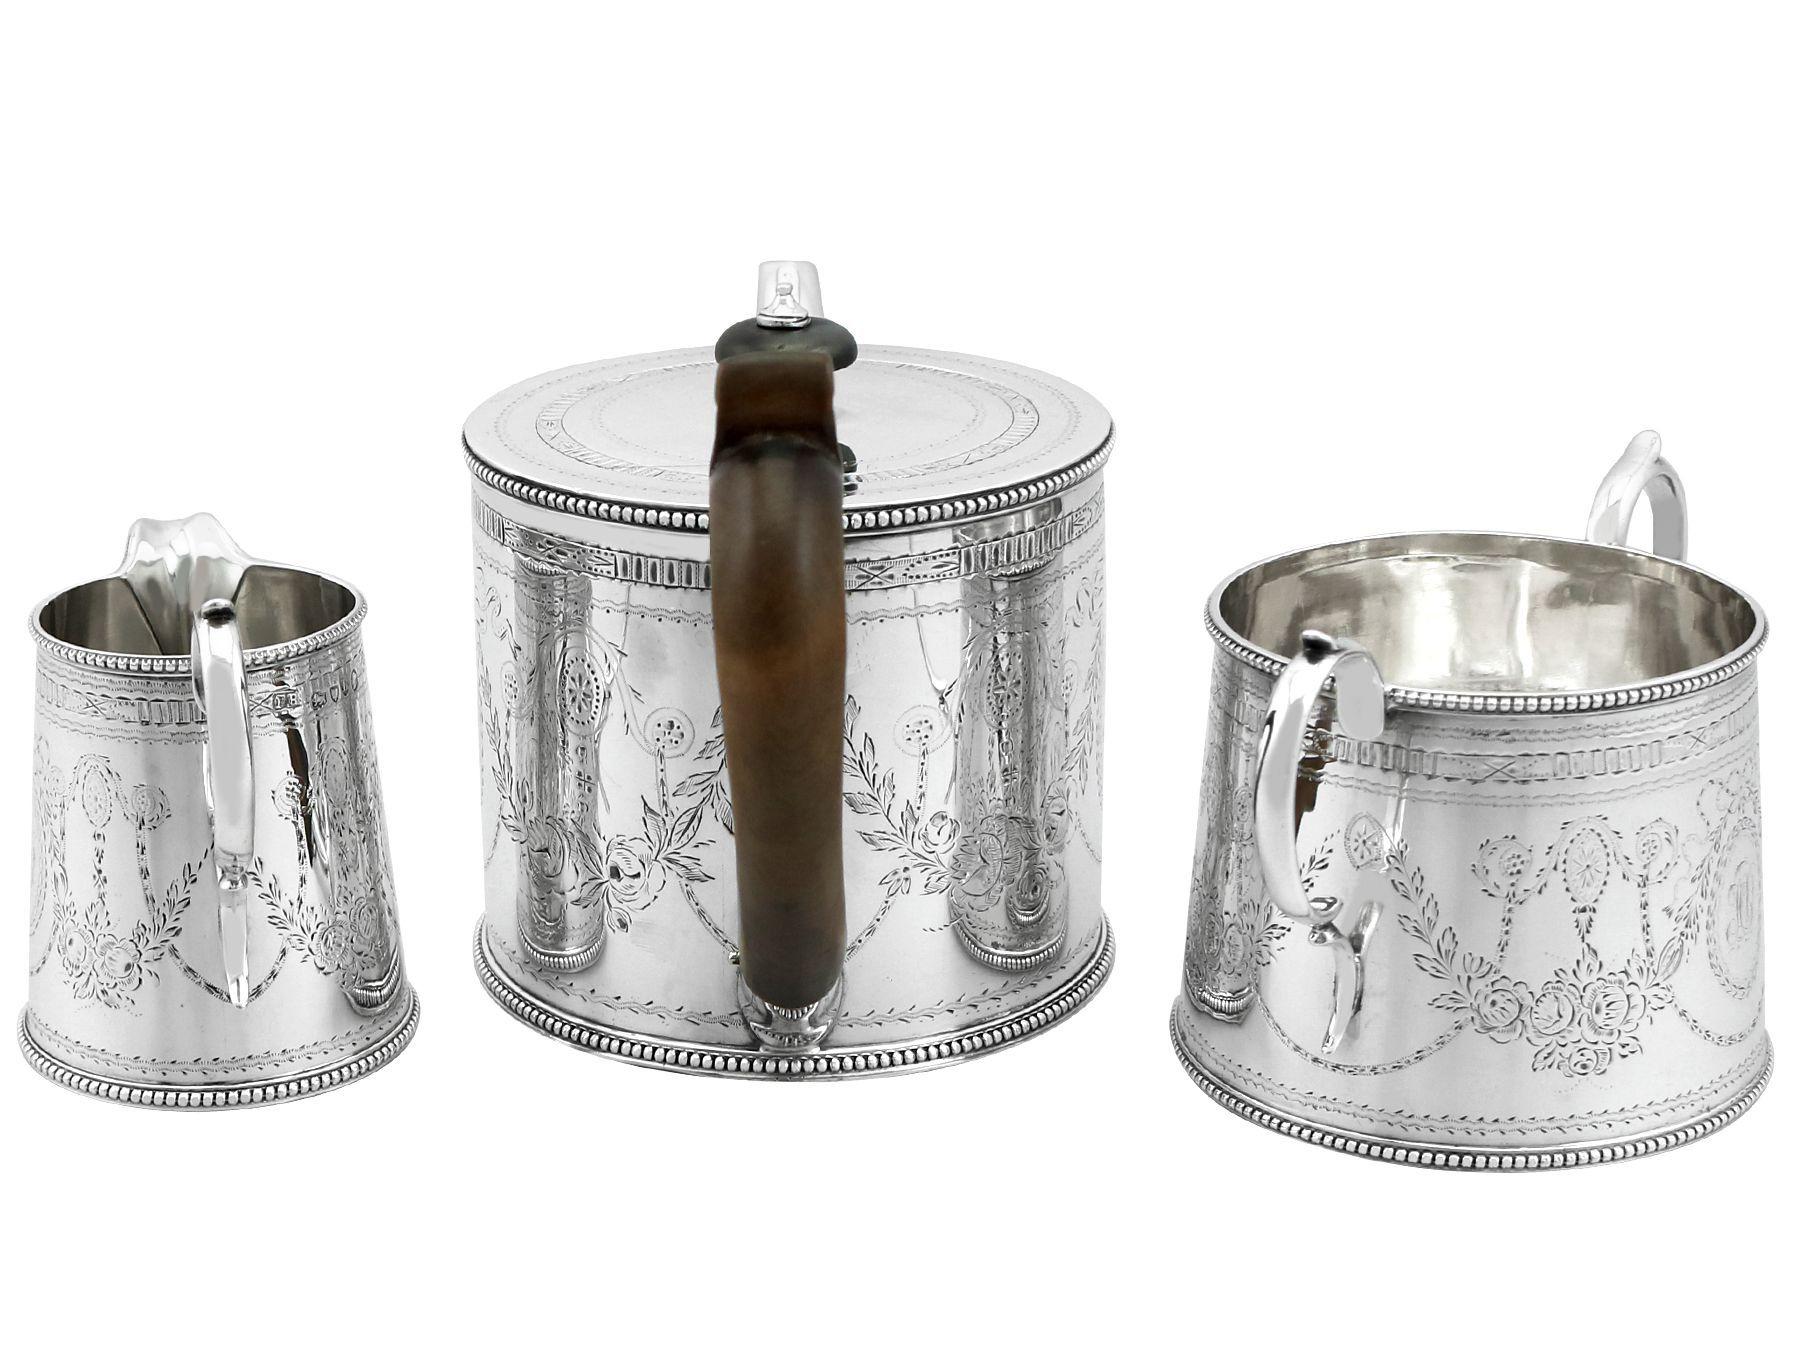 An exceptional, fine and impressive antique Victorian English sterling silver three piece bachelor tea service/set; an addition to our silver teaware collection

This antique Victorian sterling silver three piece bachelor tea service/set consists of